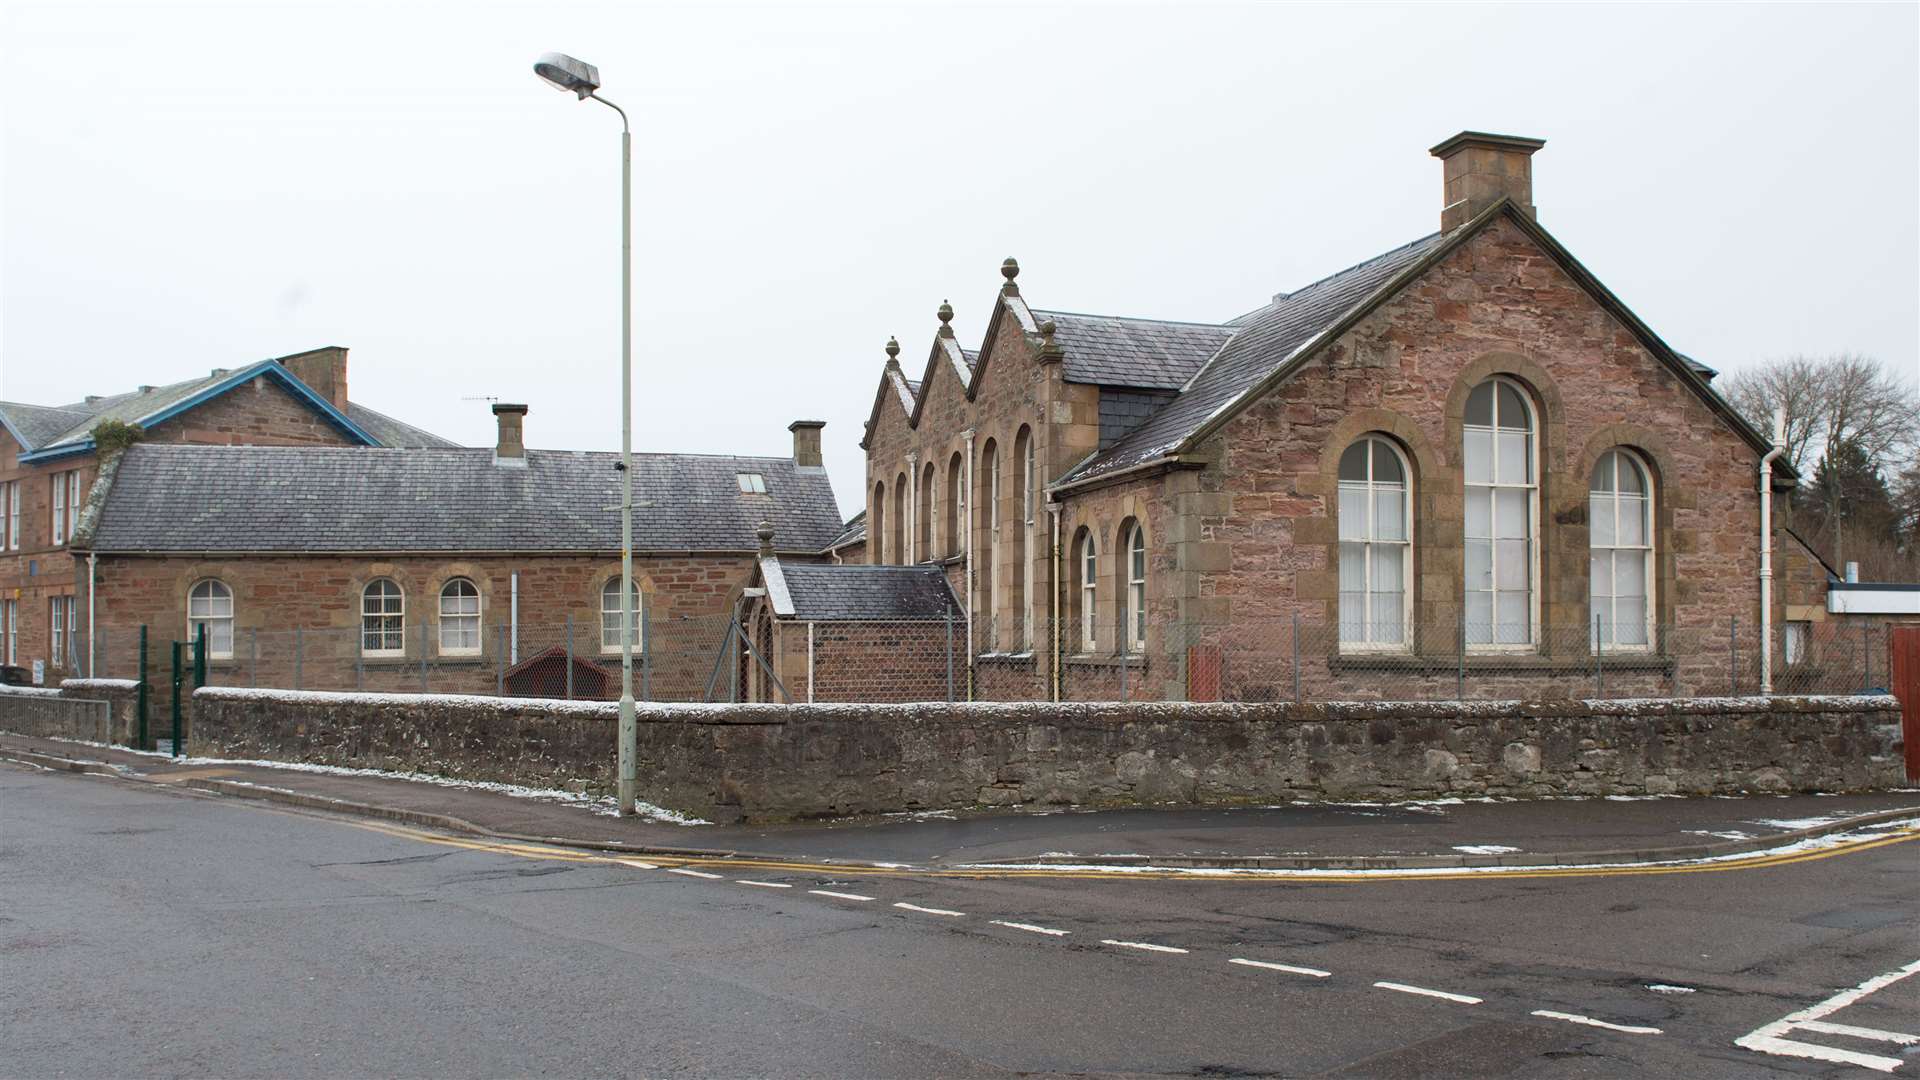 St Clement's School in Dingwall had already been deemed not fit for purpose by the council.